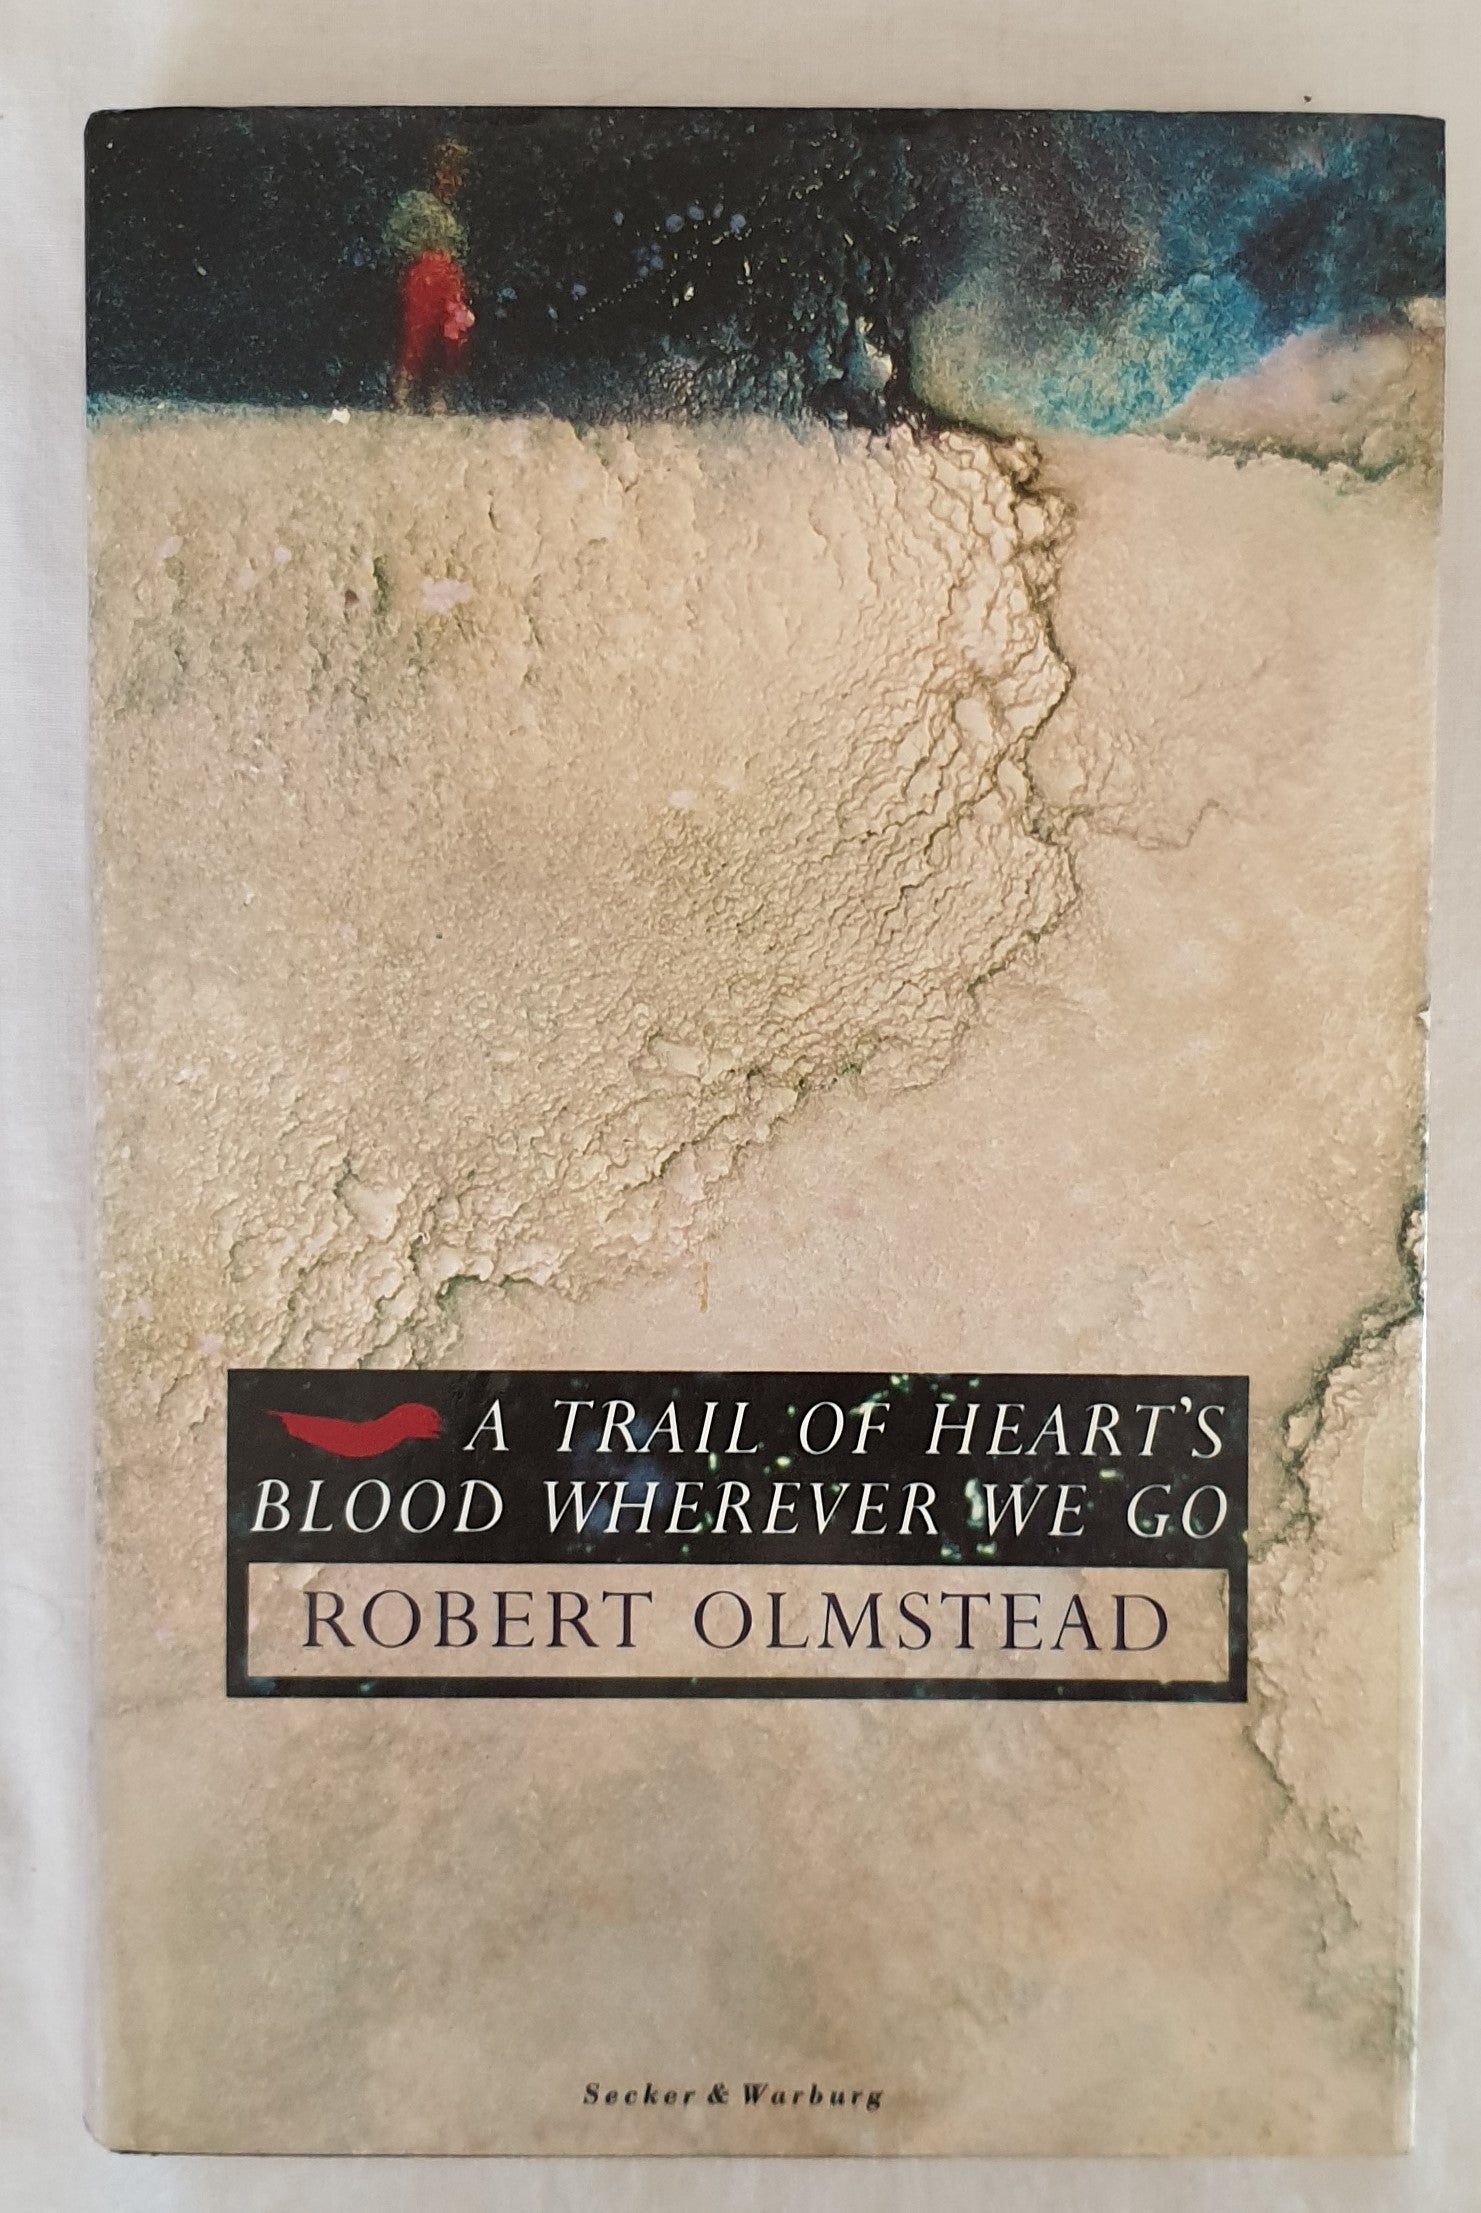 A Trail of Heart's Blood Wherever We Go by Robert Olmstead